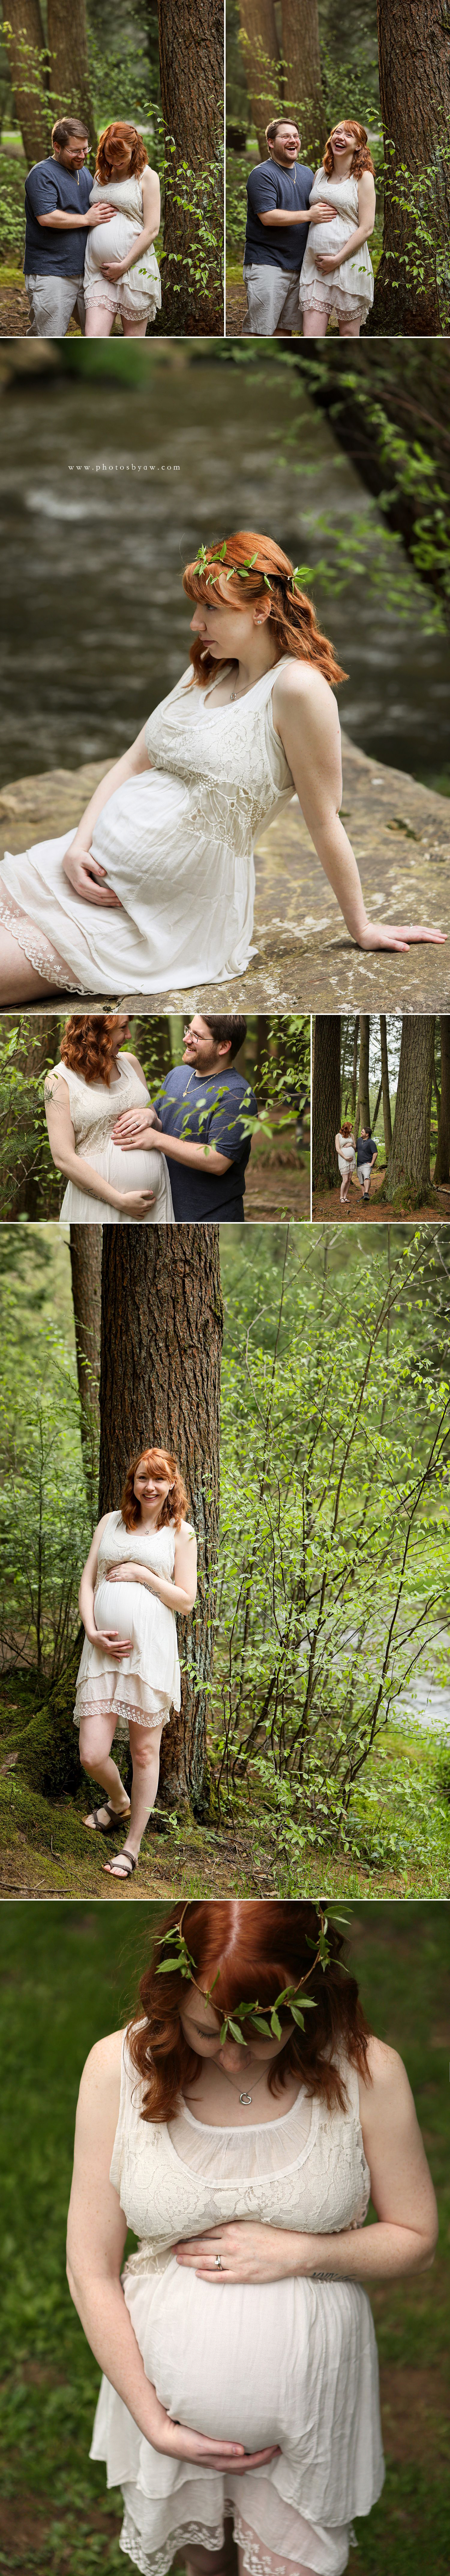 Cook Forest Maternity photos